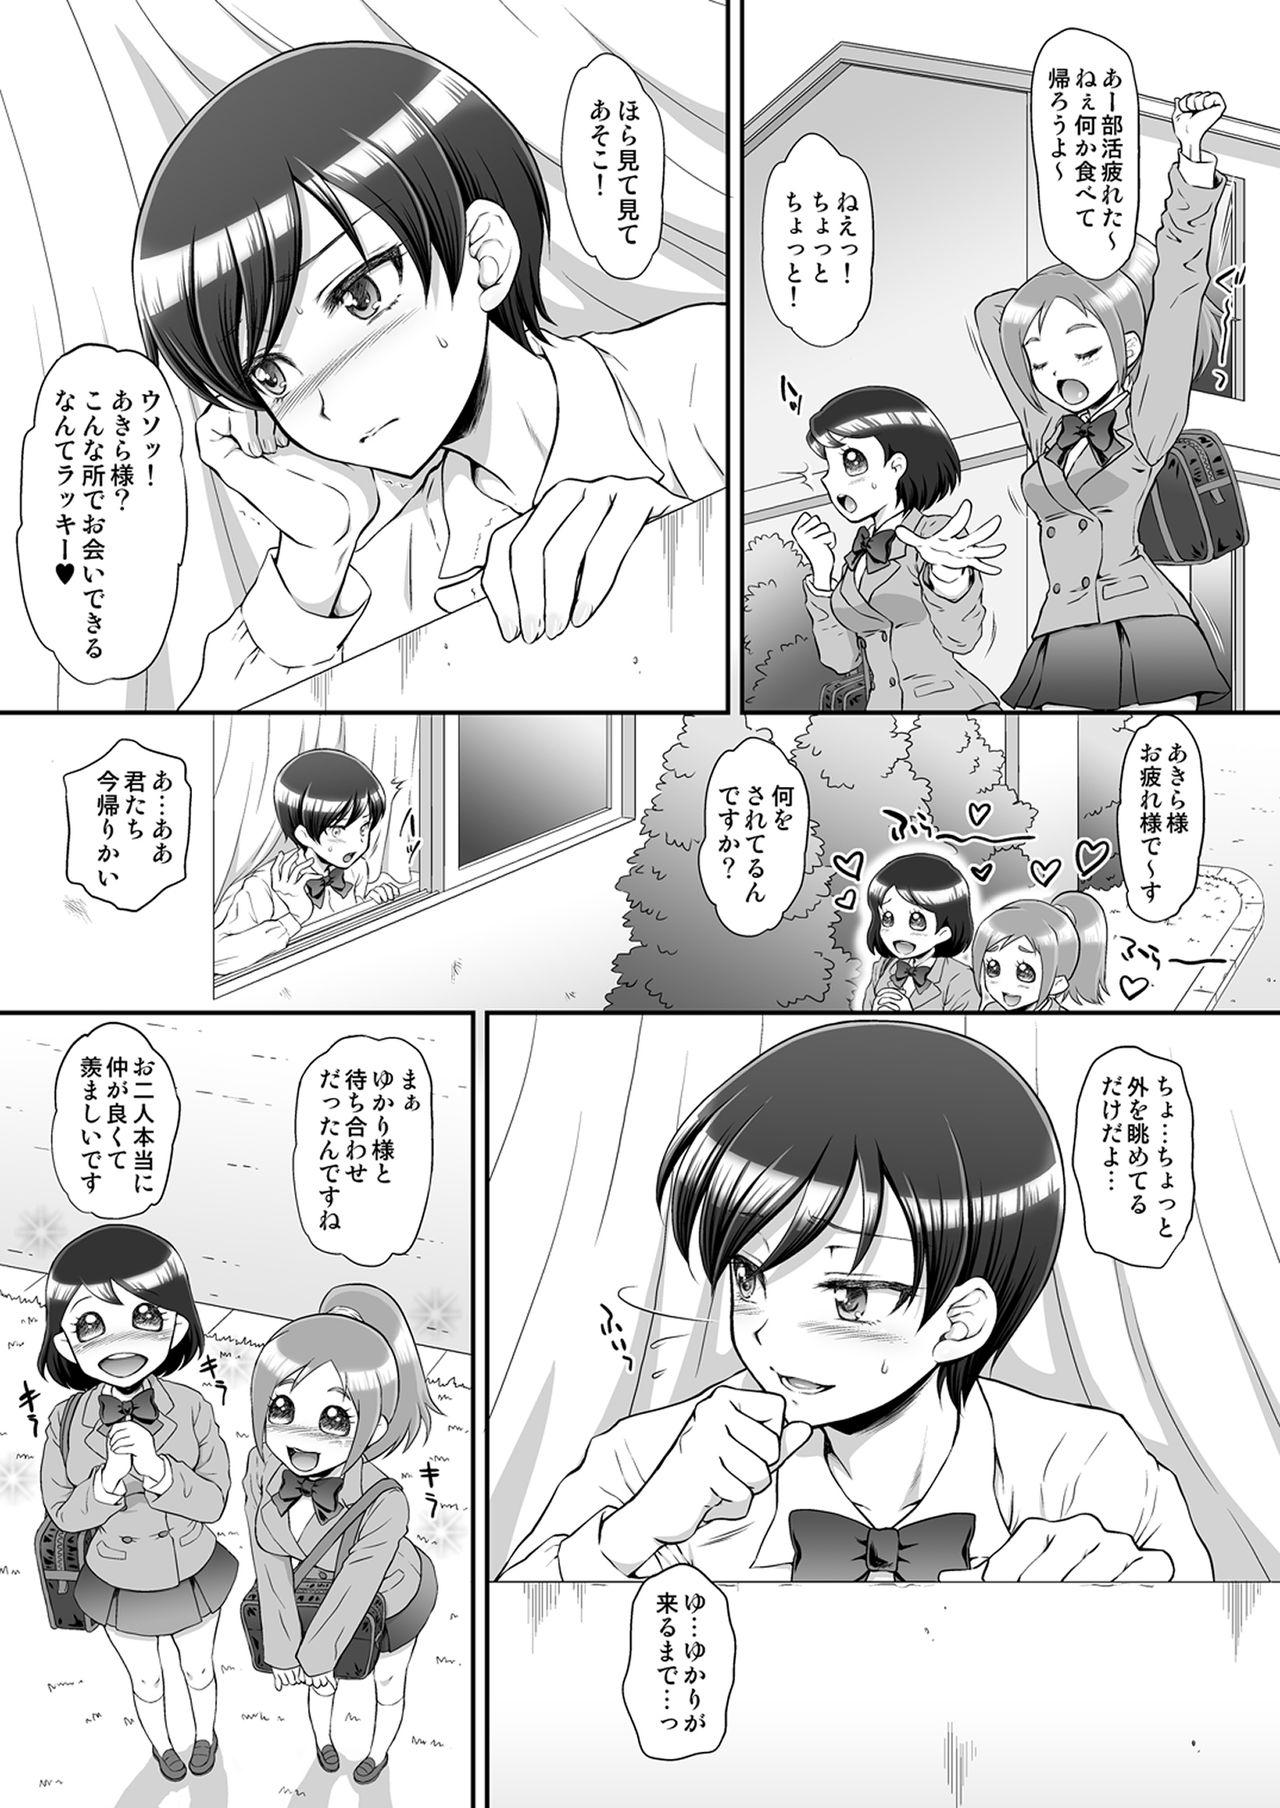 Japanese Omakebon Collection 2 - Pretty cure Lesbo - Page 3